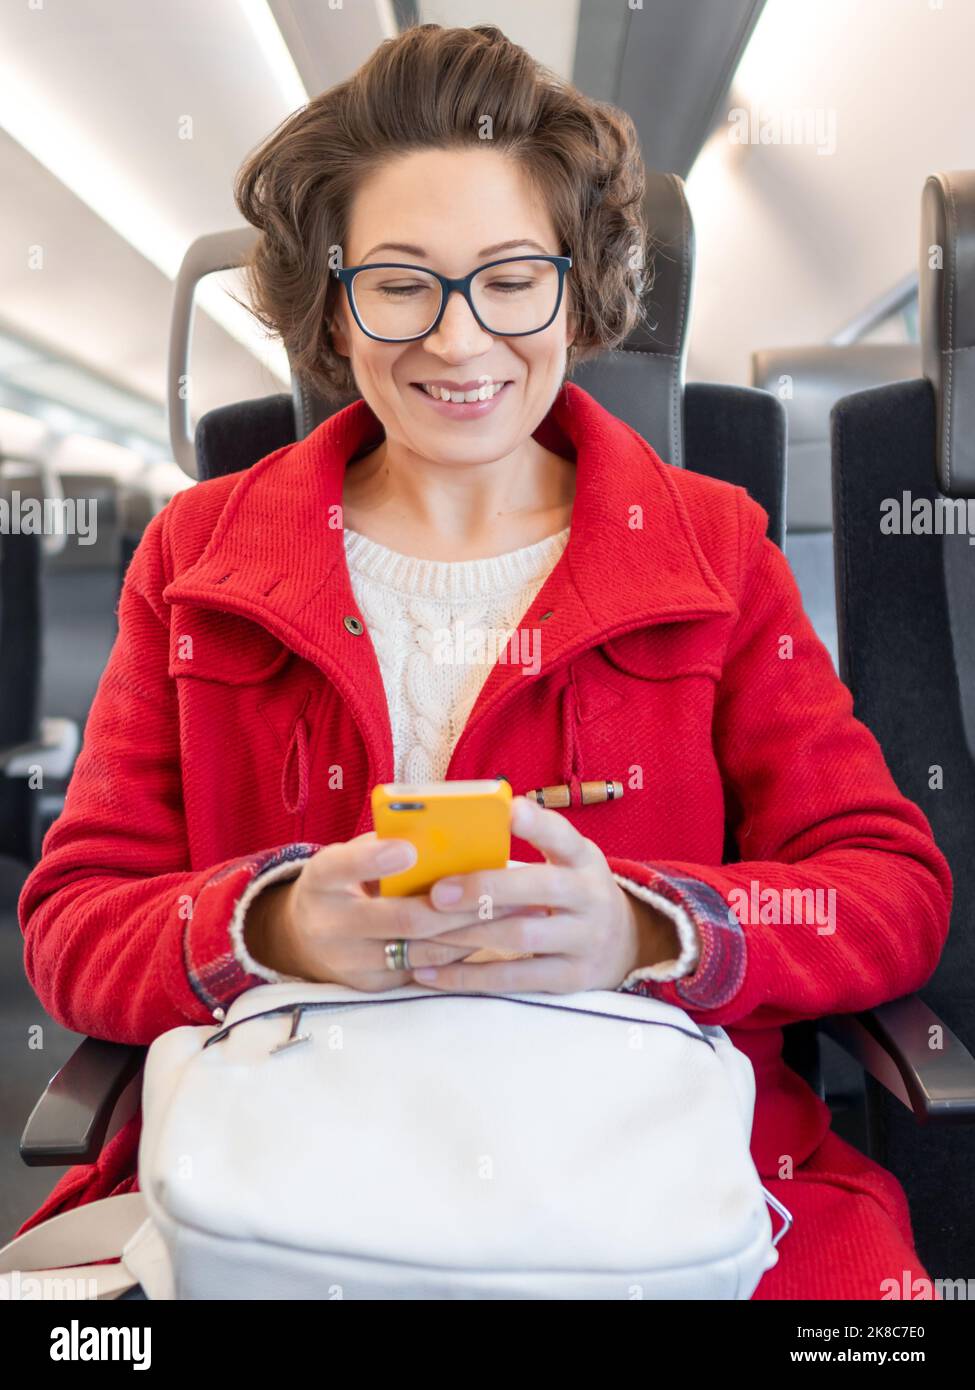 Smiling woman in red duffle coat texting on smartphone in suburban train. Travel by land vehicle. Stock Photo